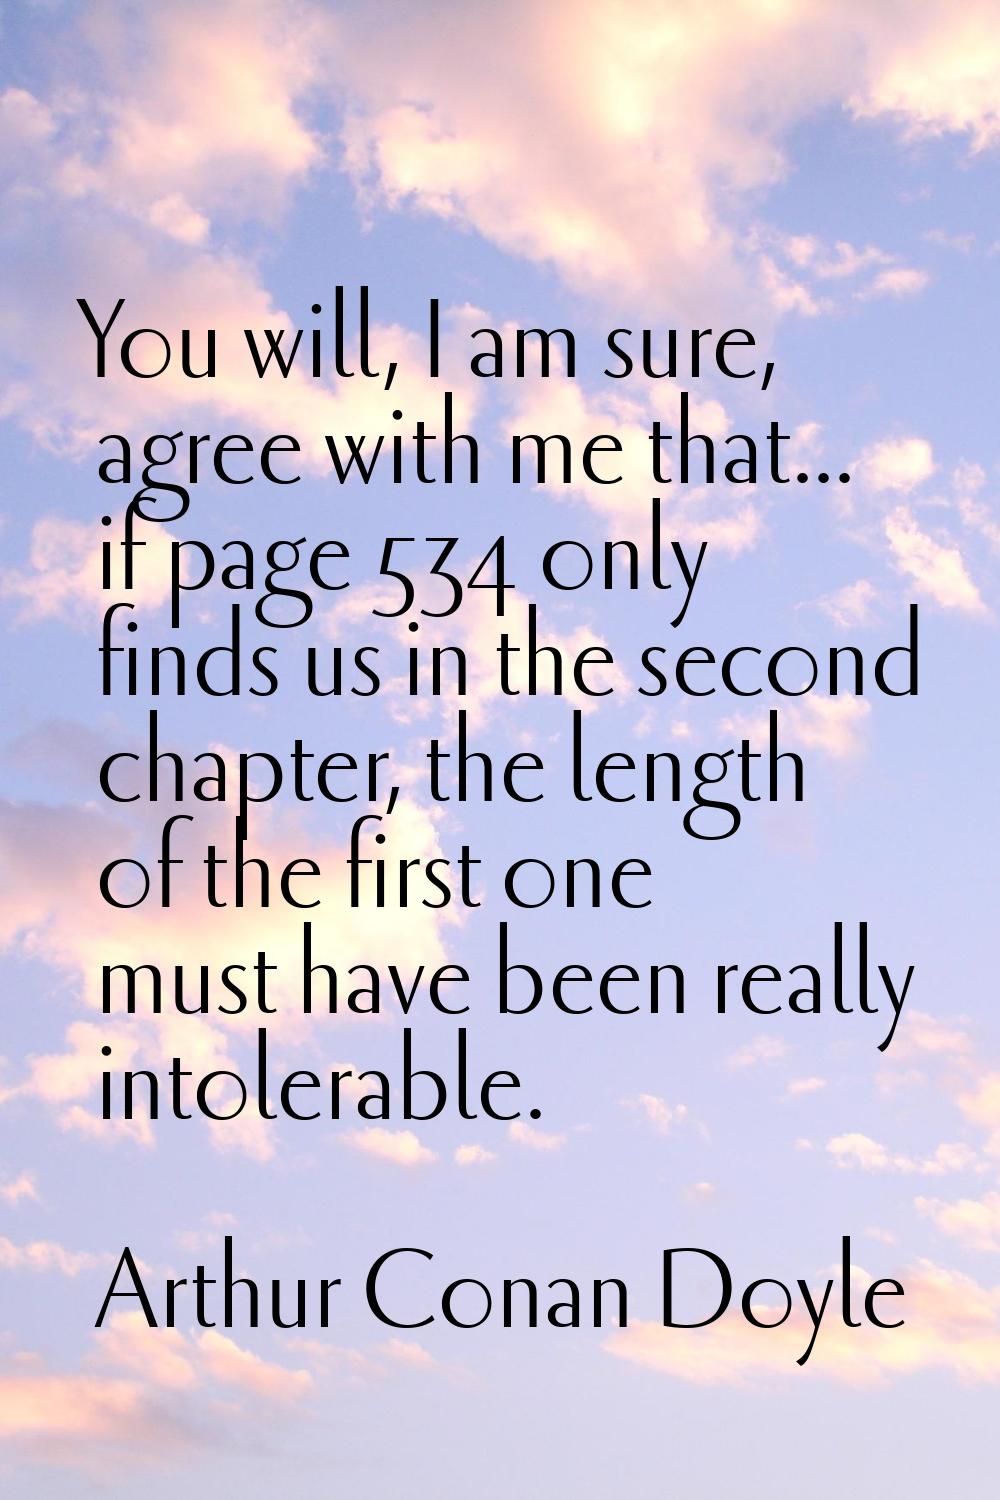 You will, I am sure, agree with me that... if page 534 only finds us in the second chapter, the len